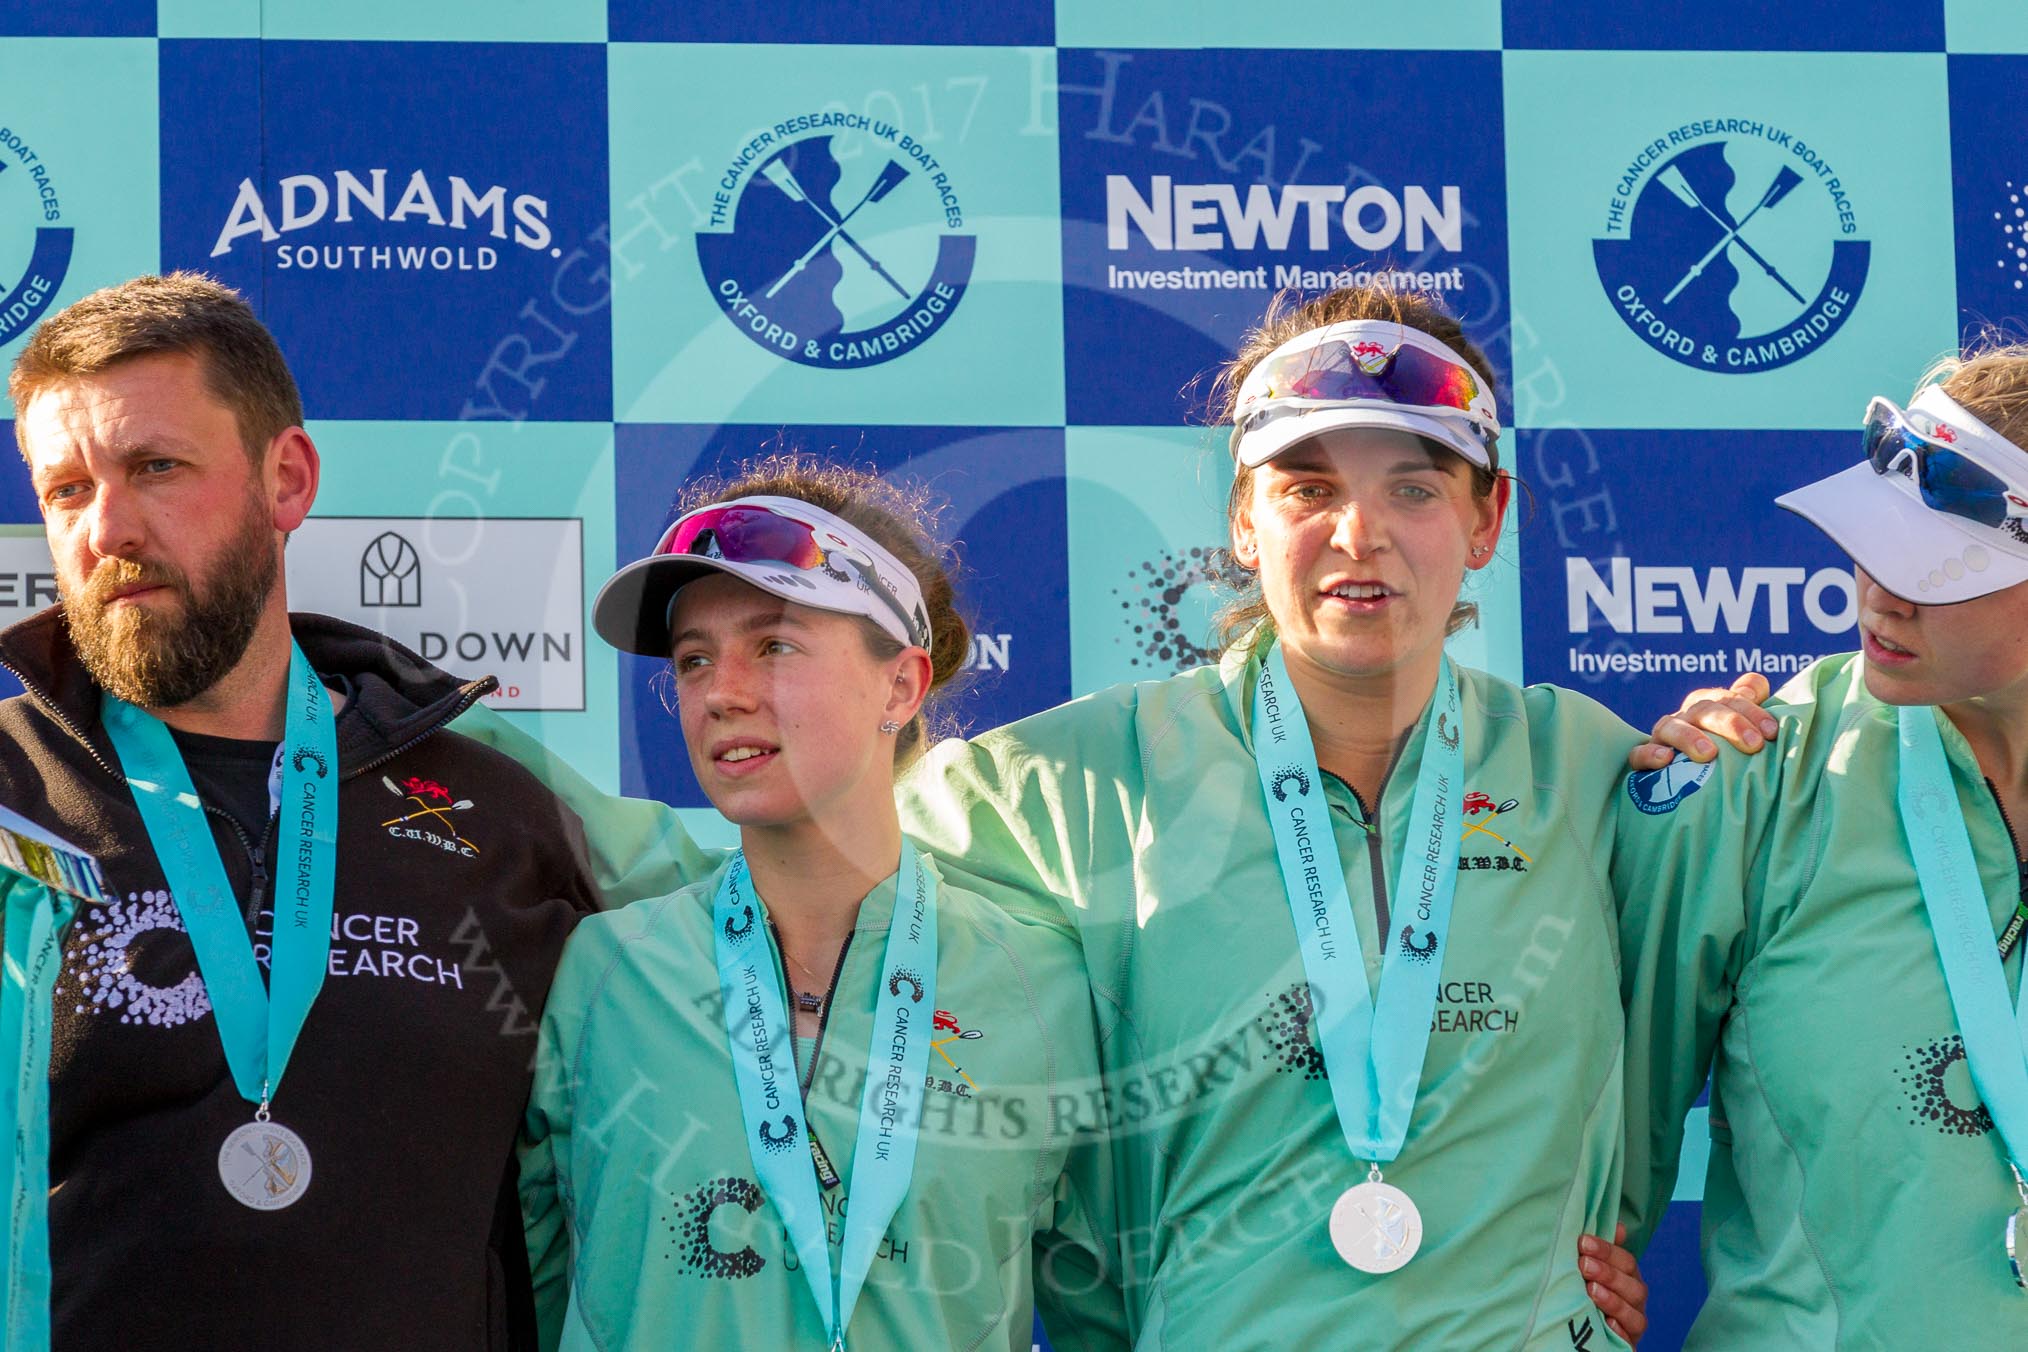 The Boat Race season 2017 -  The Cancer Research Women's Boat Race: CUWBC with their medals at the price giving ceremony, here head coach Rob Barker, 2 seat Imogen Grant,.
River Thames between Putney Bridge and Mortlake,
London SW15,

United Kingdom,
on 02 April 2017 at 17:12, image #243